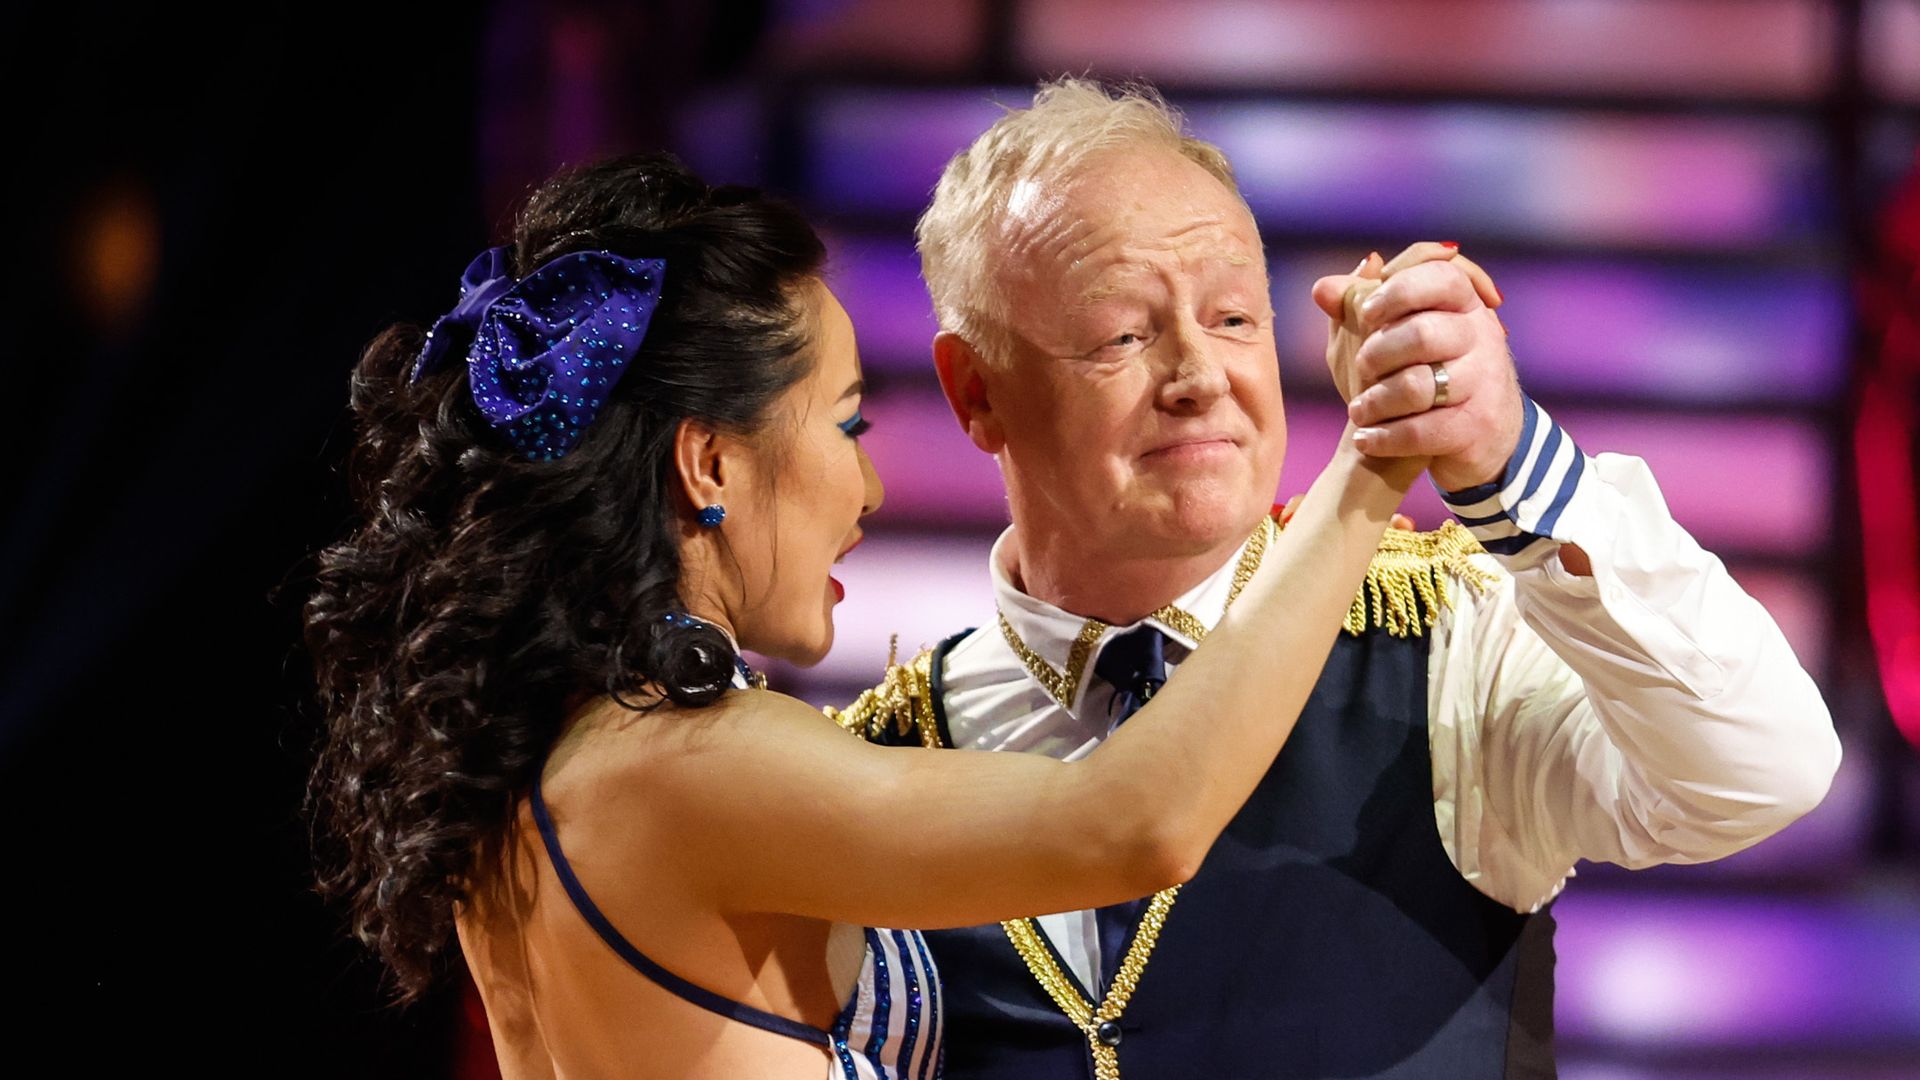 Strictly's Les Dennis left devasted over death of co-star hours before early exit